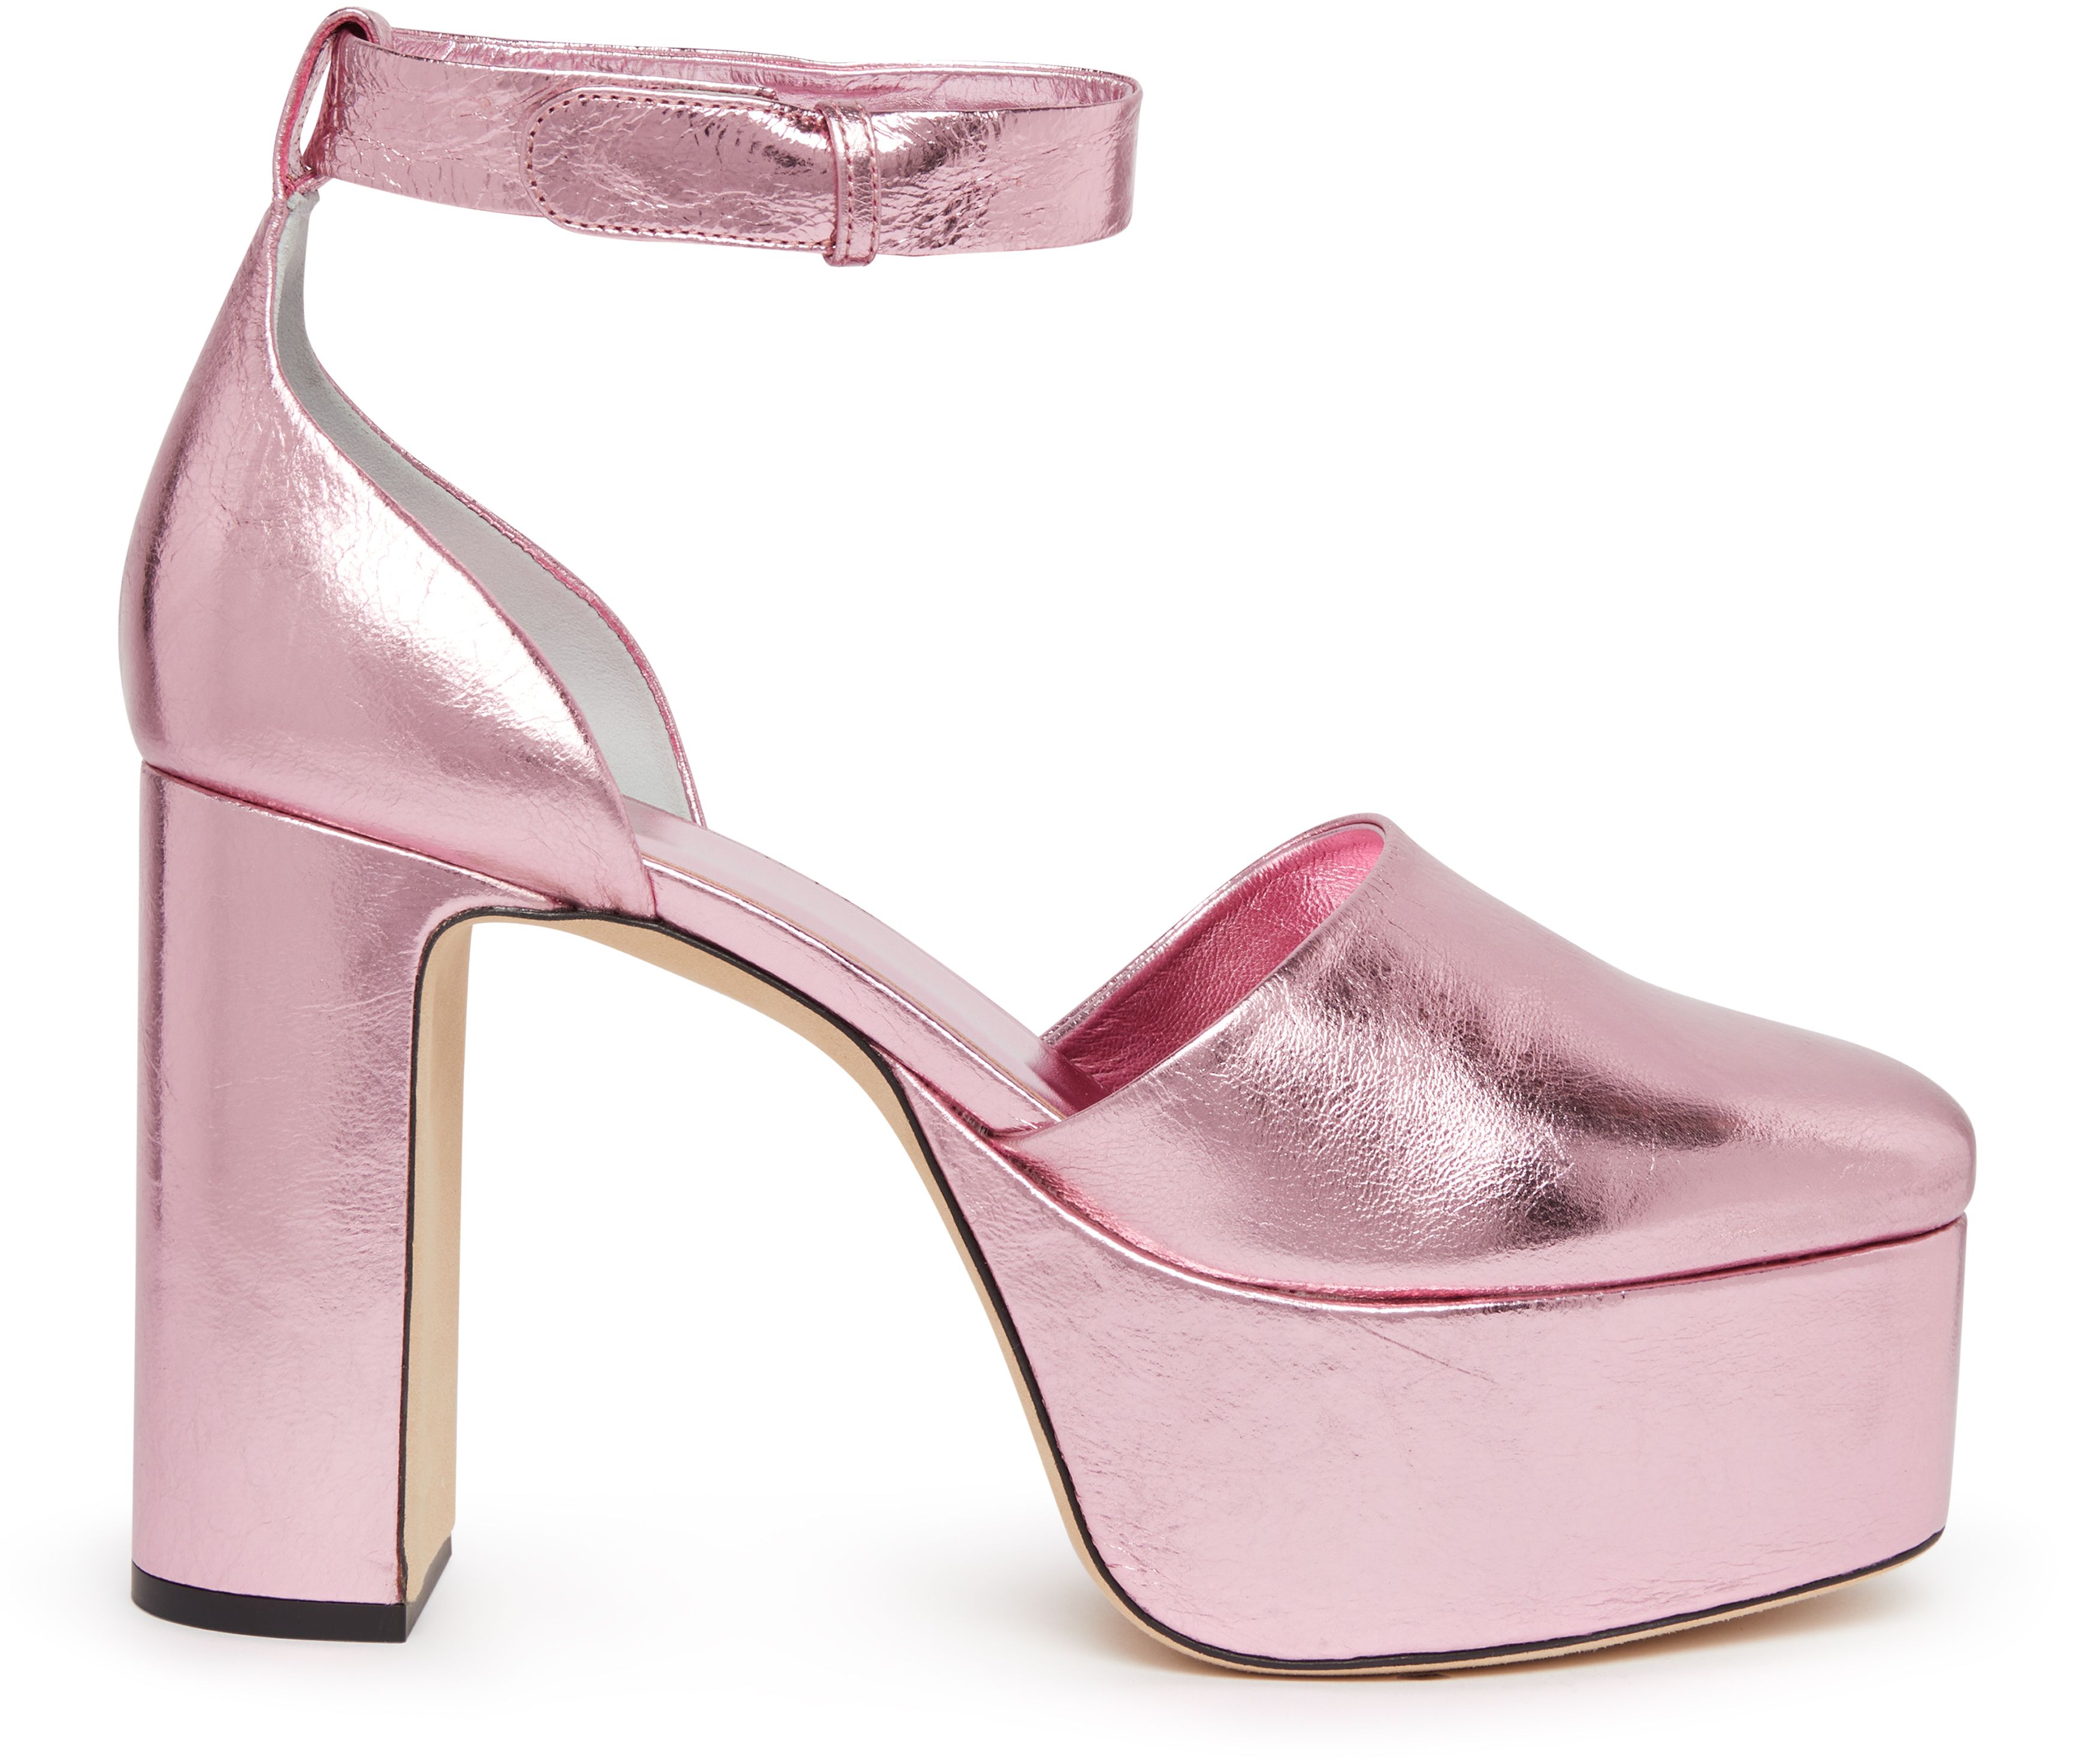 BY FAR Barb pink metallic leather plateforme sandals